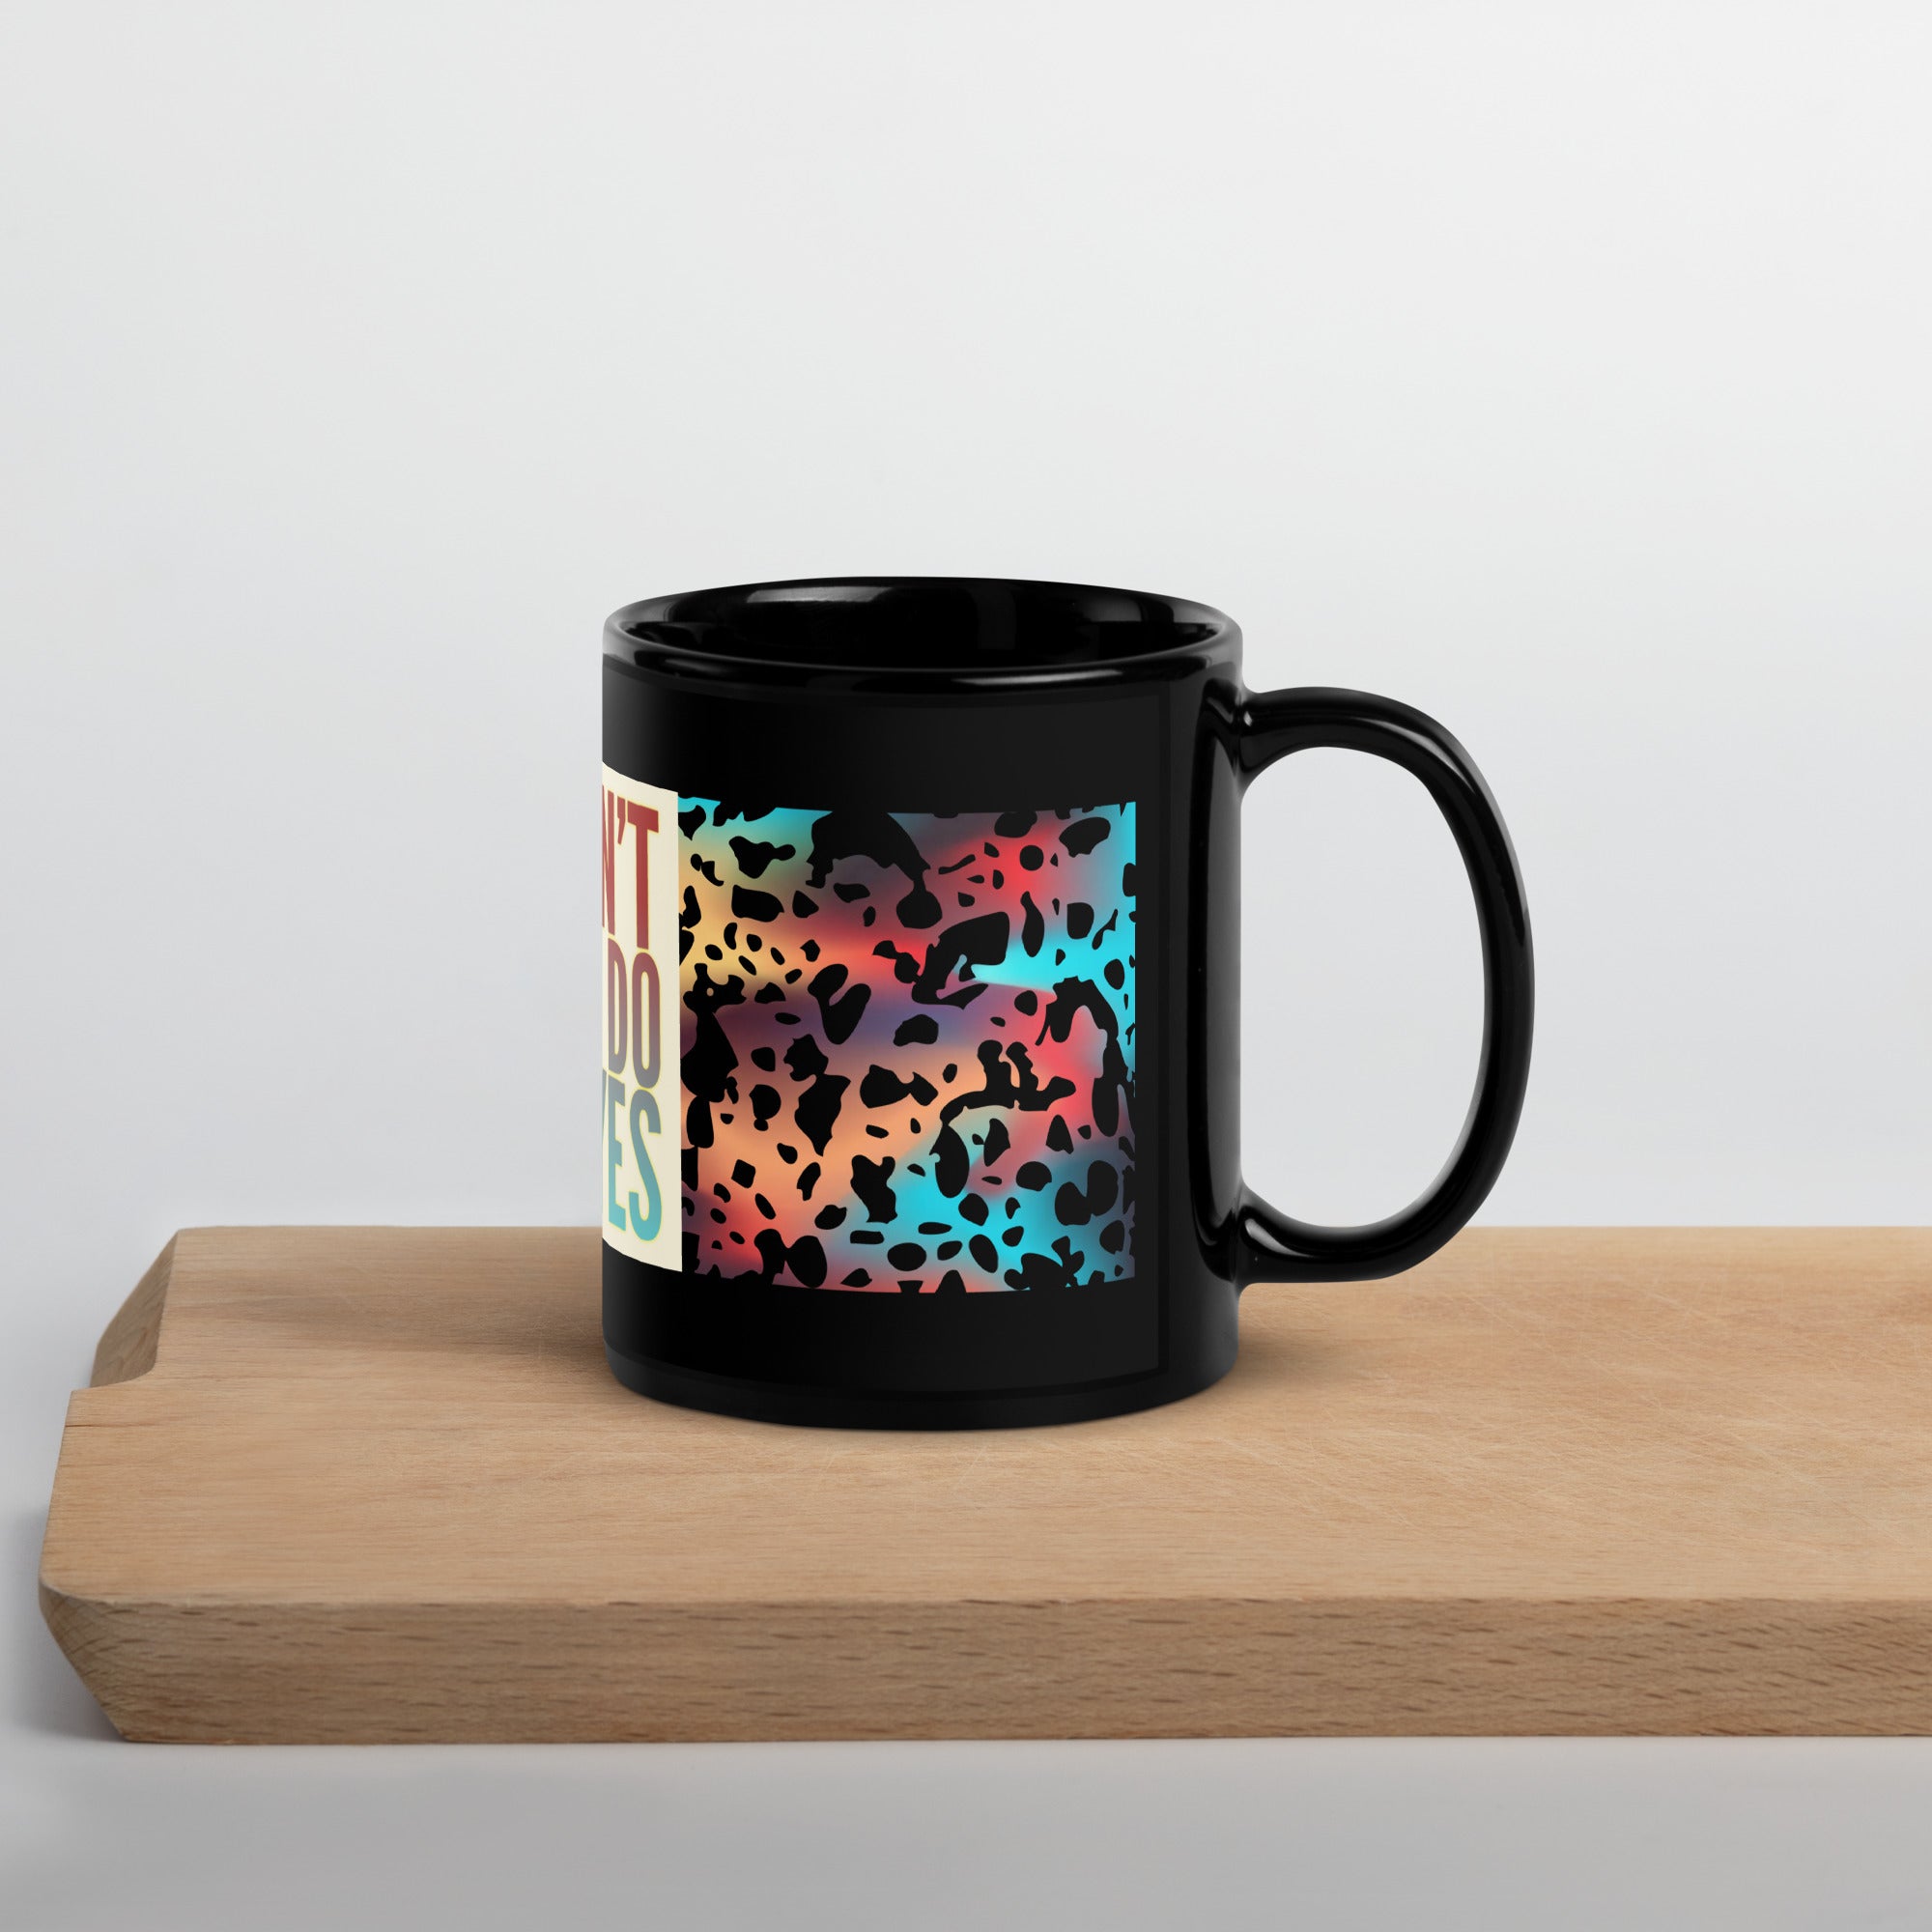 GloWell Designs - Black Glossy Mug - Motivational Quote - Lift Up Your Eyes - GloWell Designs